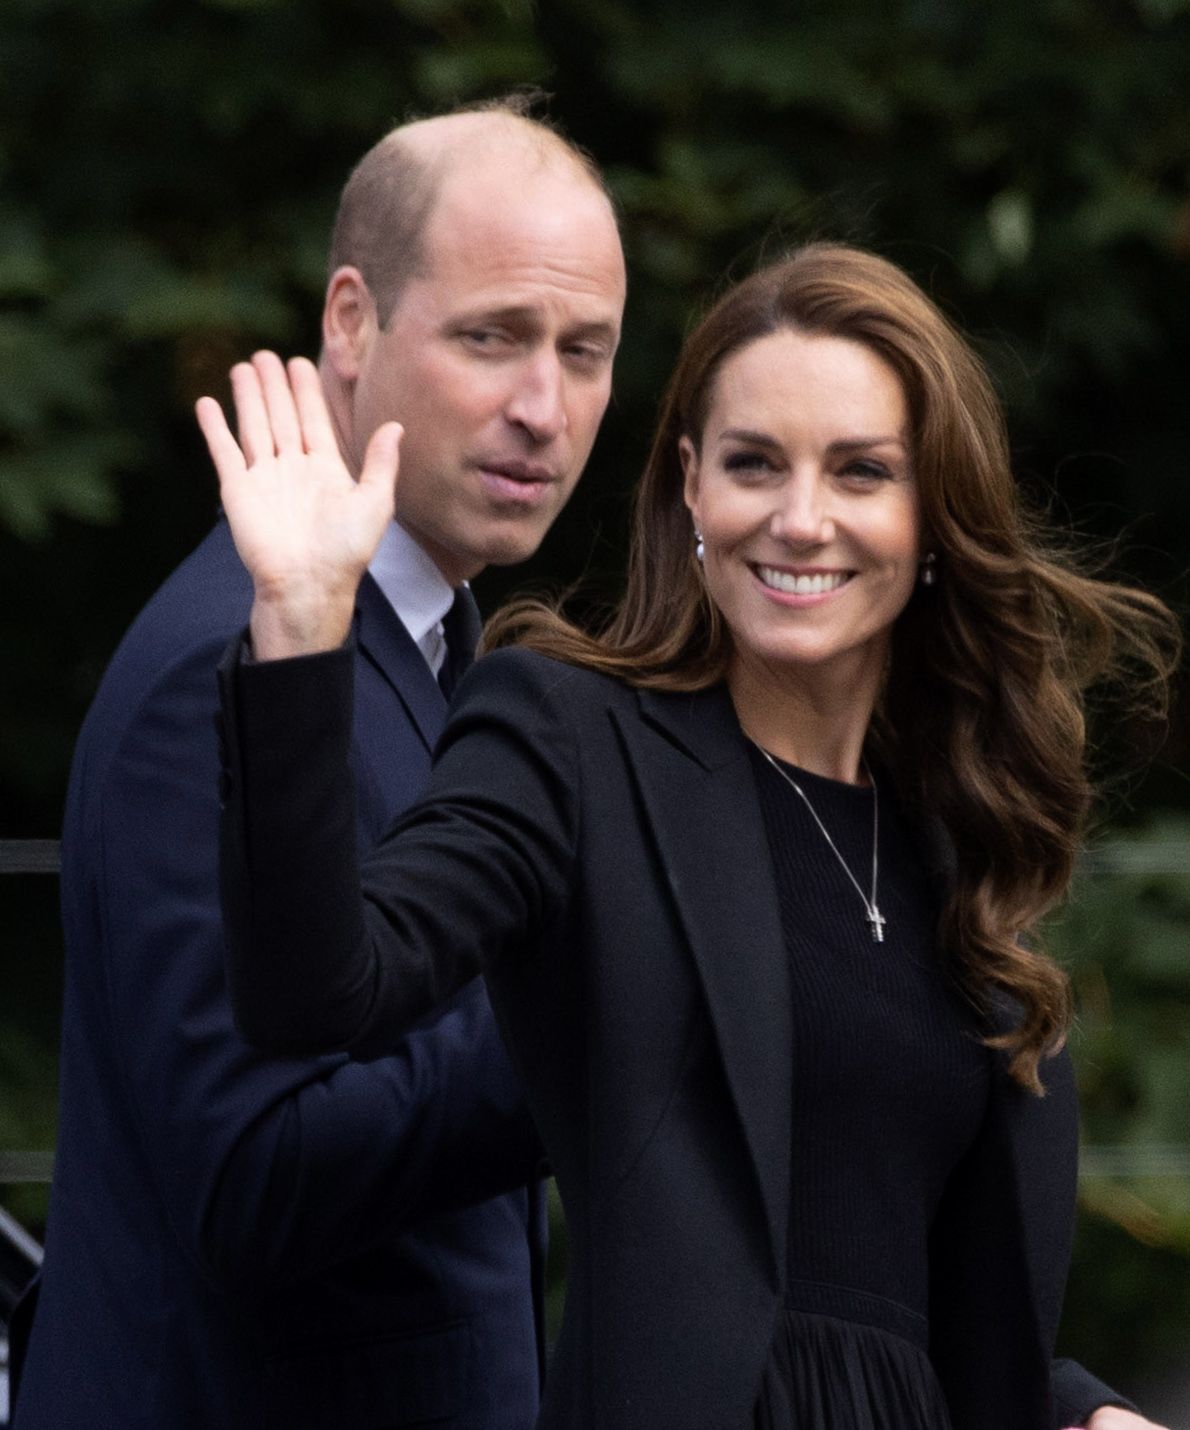 <p><a href="https://www.wonderwall.com/celebrity/profiles/overview/prince-william-482.article">Prince William</a> and Princess Kate -- wearing a pair of pearl earrings that belonged to Queen Elizabeth II -- waved to the crowds as they viewed floral tributes left at the Norwich Gates outside his grandmother's Sandringham estate in England's Norfolk region, where the royal family traditionally spent their Christmases when the queen was alive, on Sept. 15, 2022, in the lead-up to Her Majesty's funeral. They and other senior royals stepped in to support William's father, King Charles III, as he retreated to his Highgrove estate to spend a day in quiet reflection after a packed schedule of events following the queen's death on Sept. 8.</p>